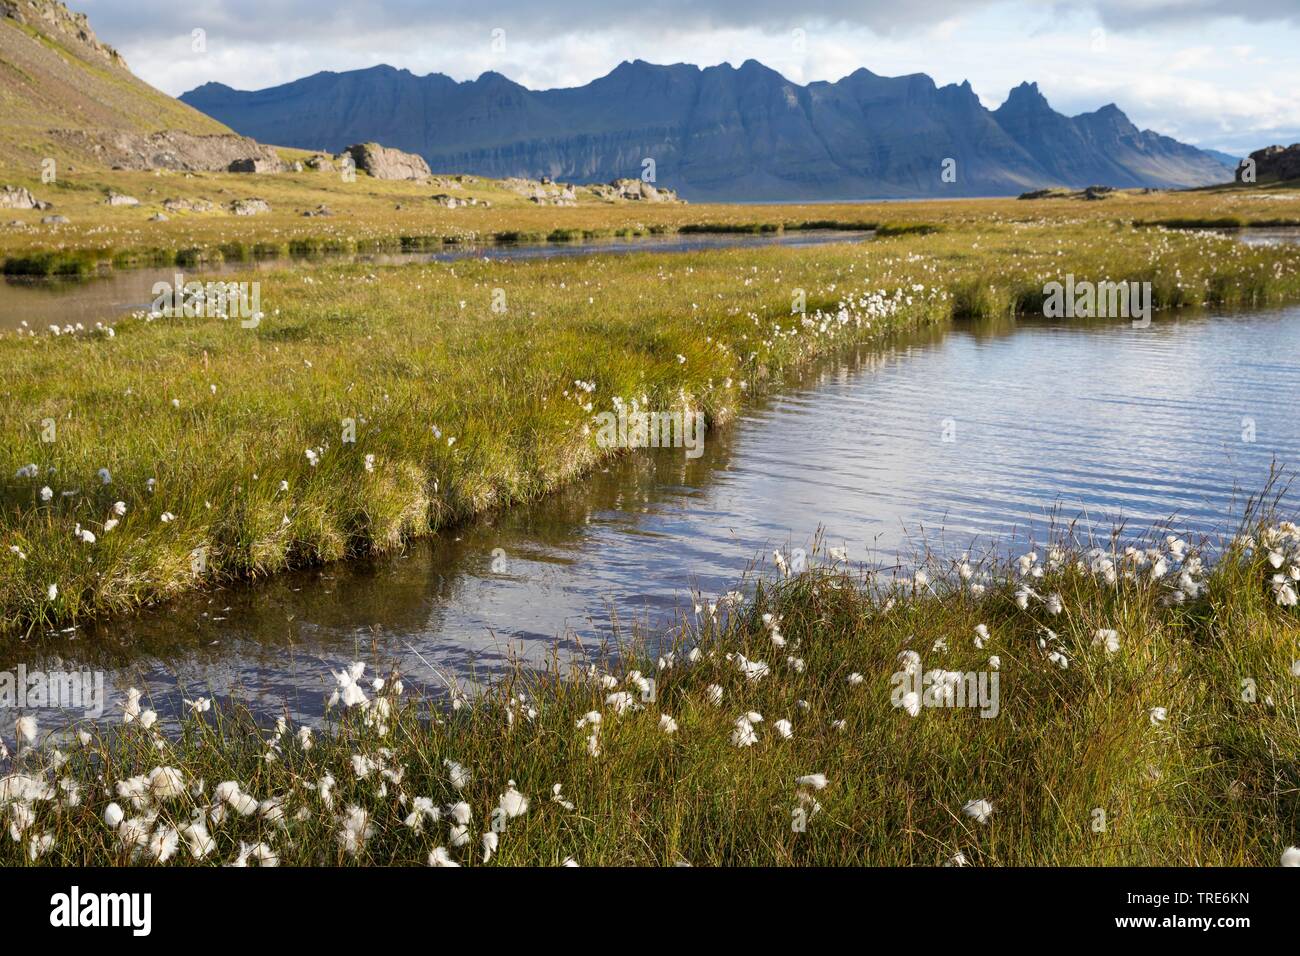 View over tundra and ponds with cotton grass near Breidalsvik, in the background mountains of the Kambanes penninsula, Iceland Stock Photo